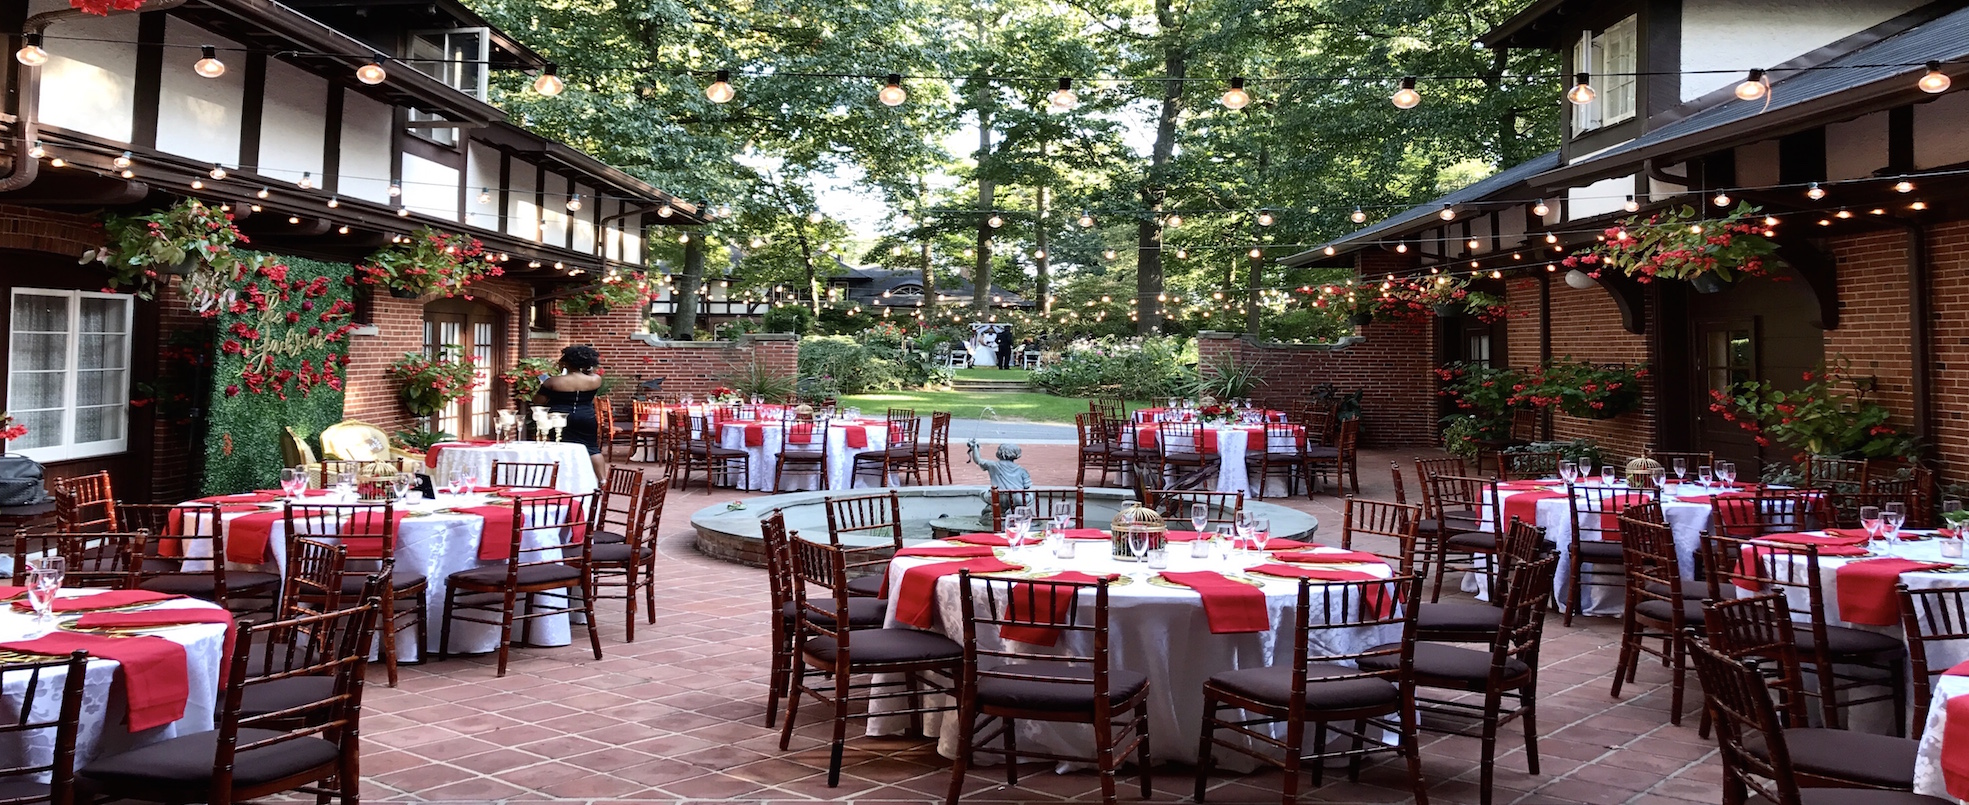 The Carriage House Maryland Wedding Venue Rental Rates